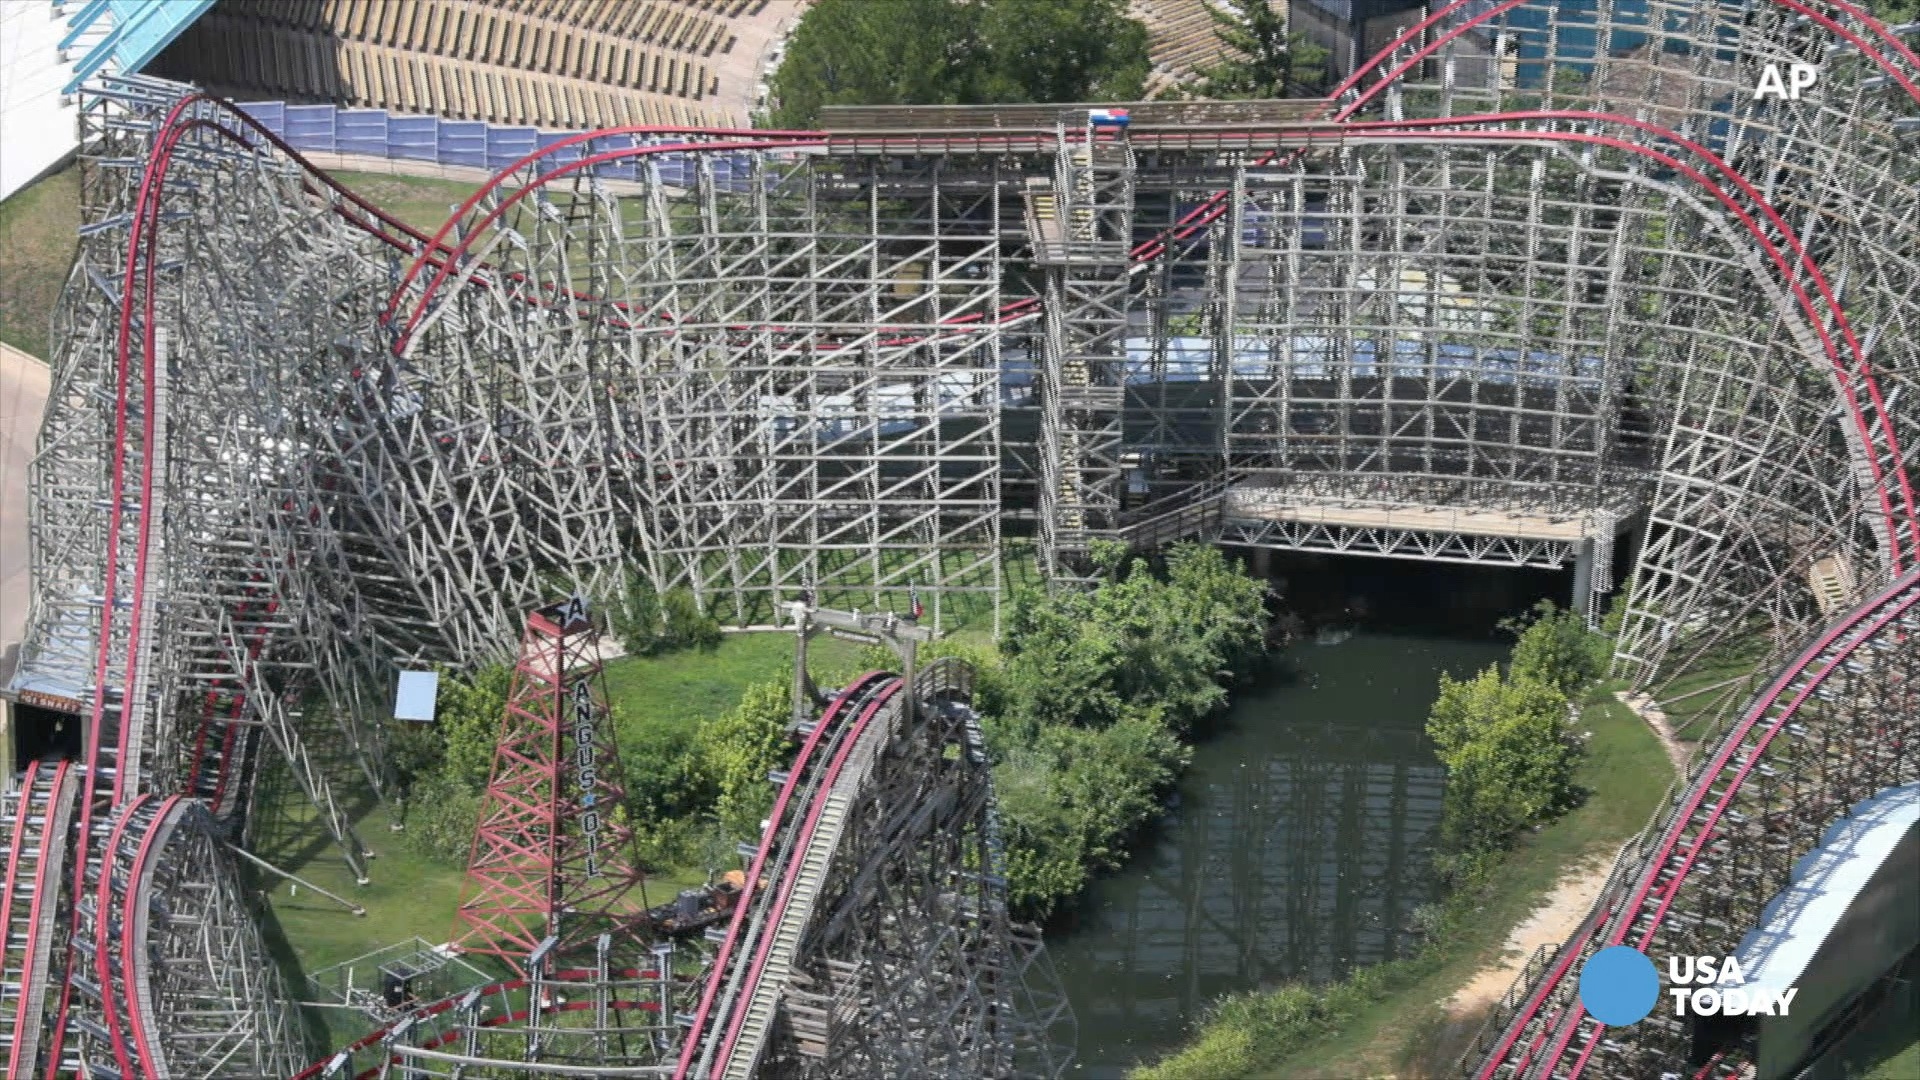 Six Flags rides accidents investigation after another malfunction